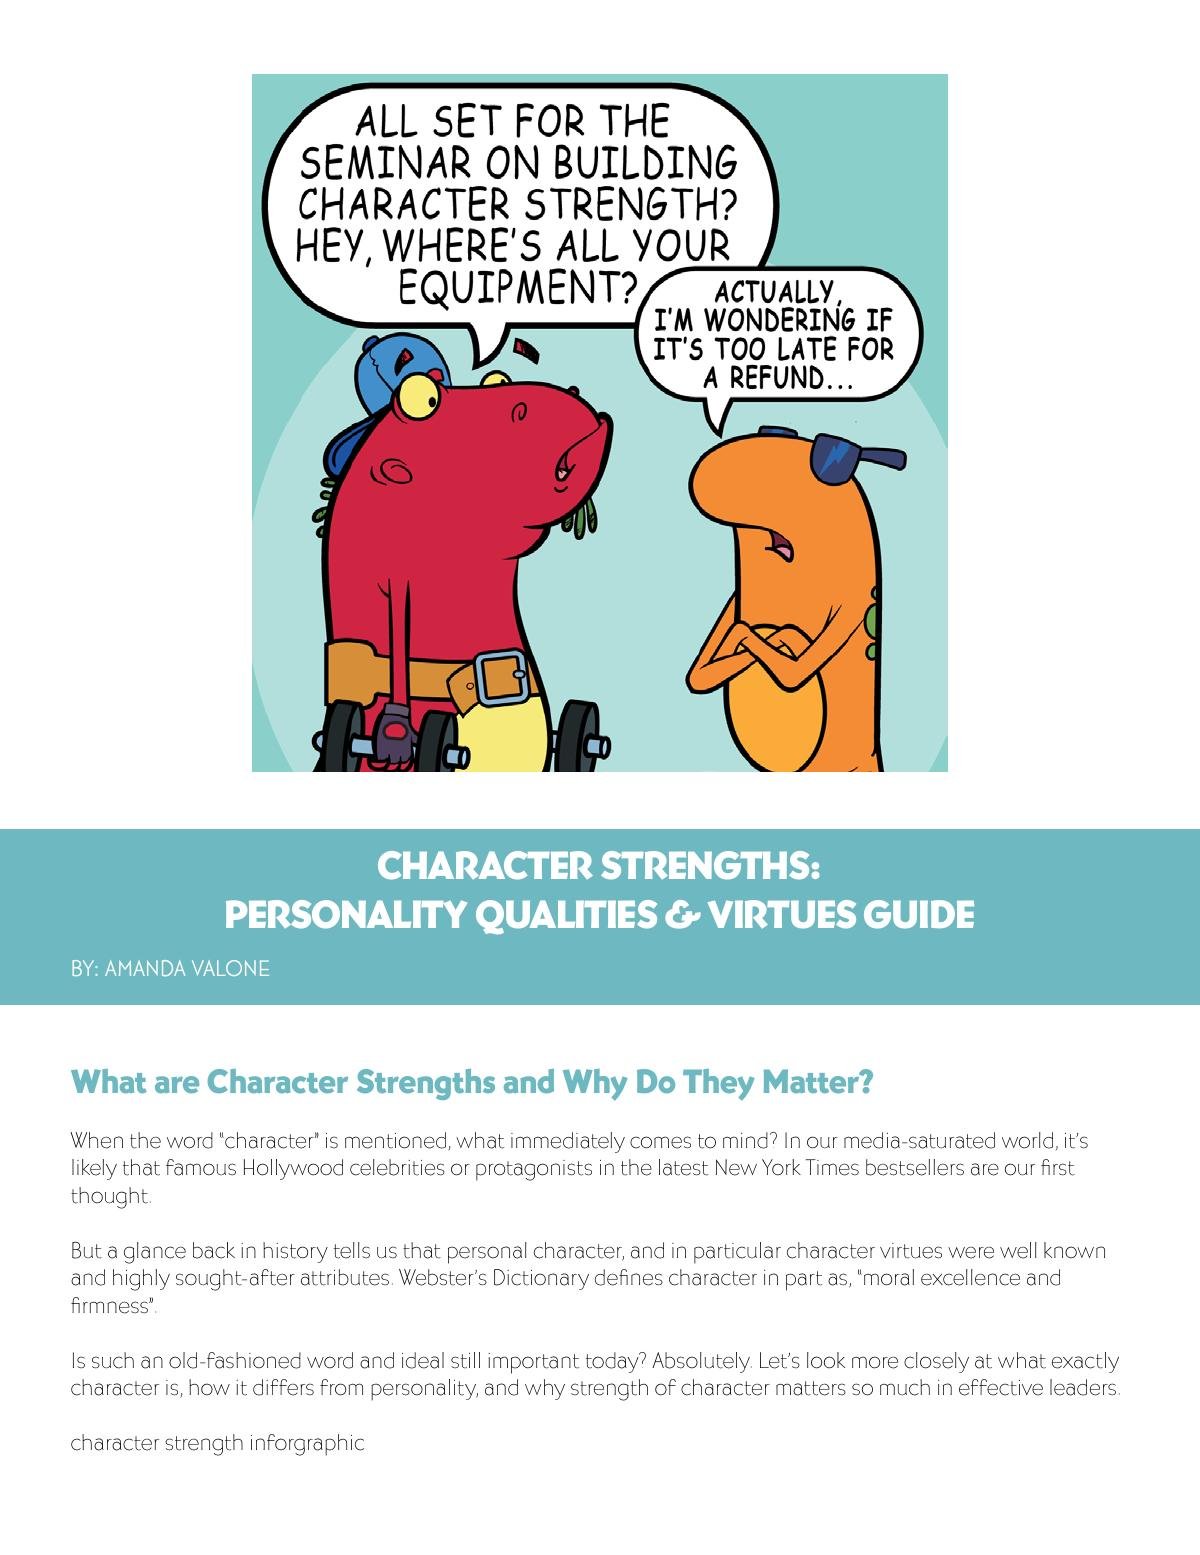 Character Strengths: Personality Qualities & Virtues Guide